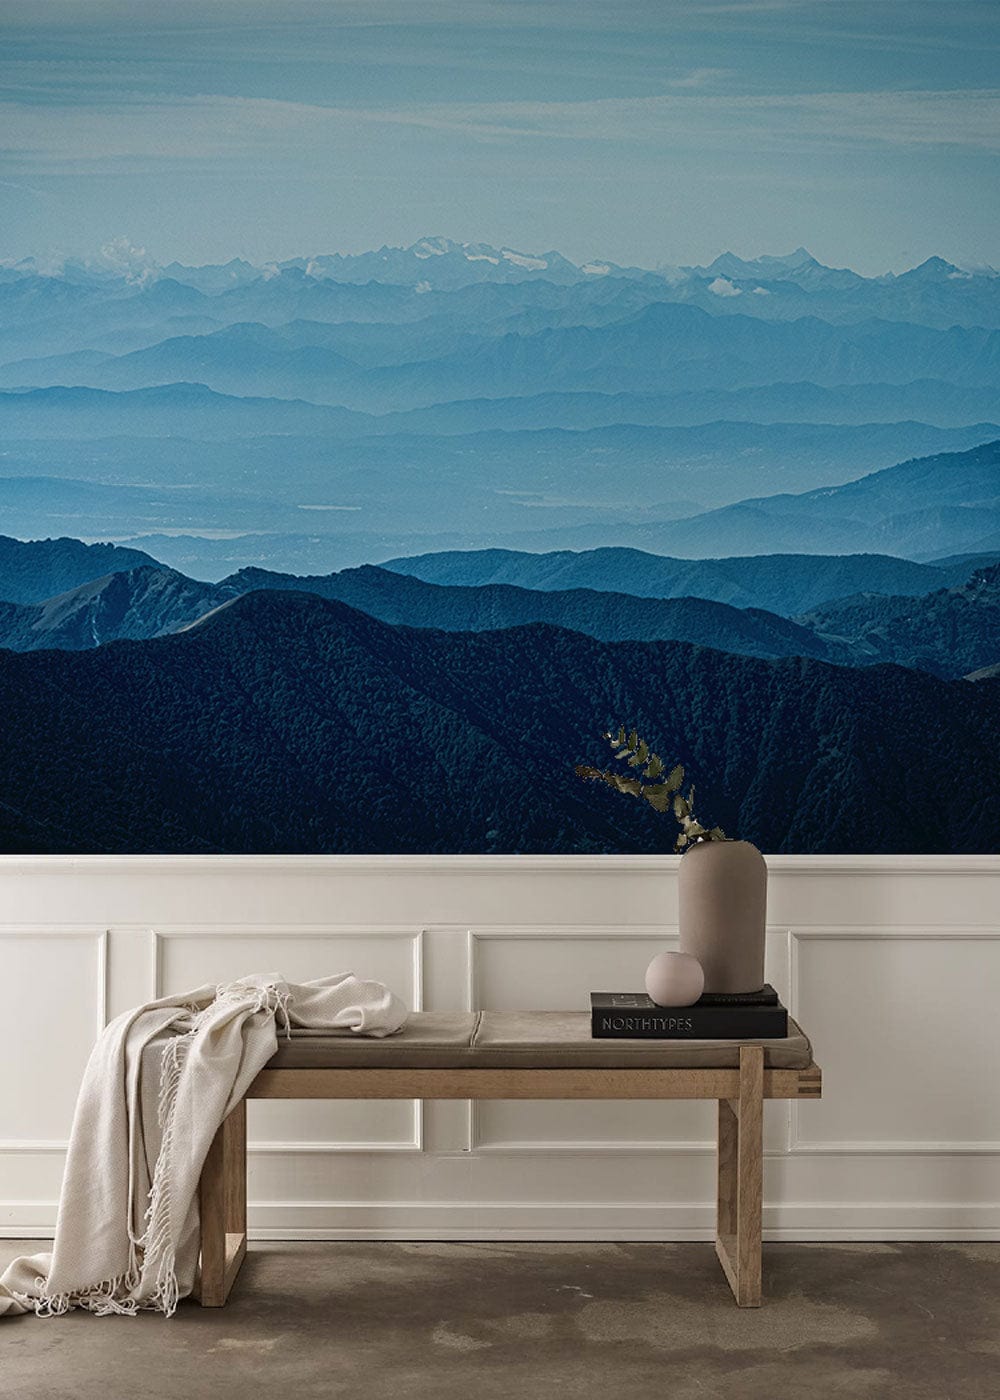 Wallpaper mural of misty Rocky Mountains for use as decoration in hallways